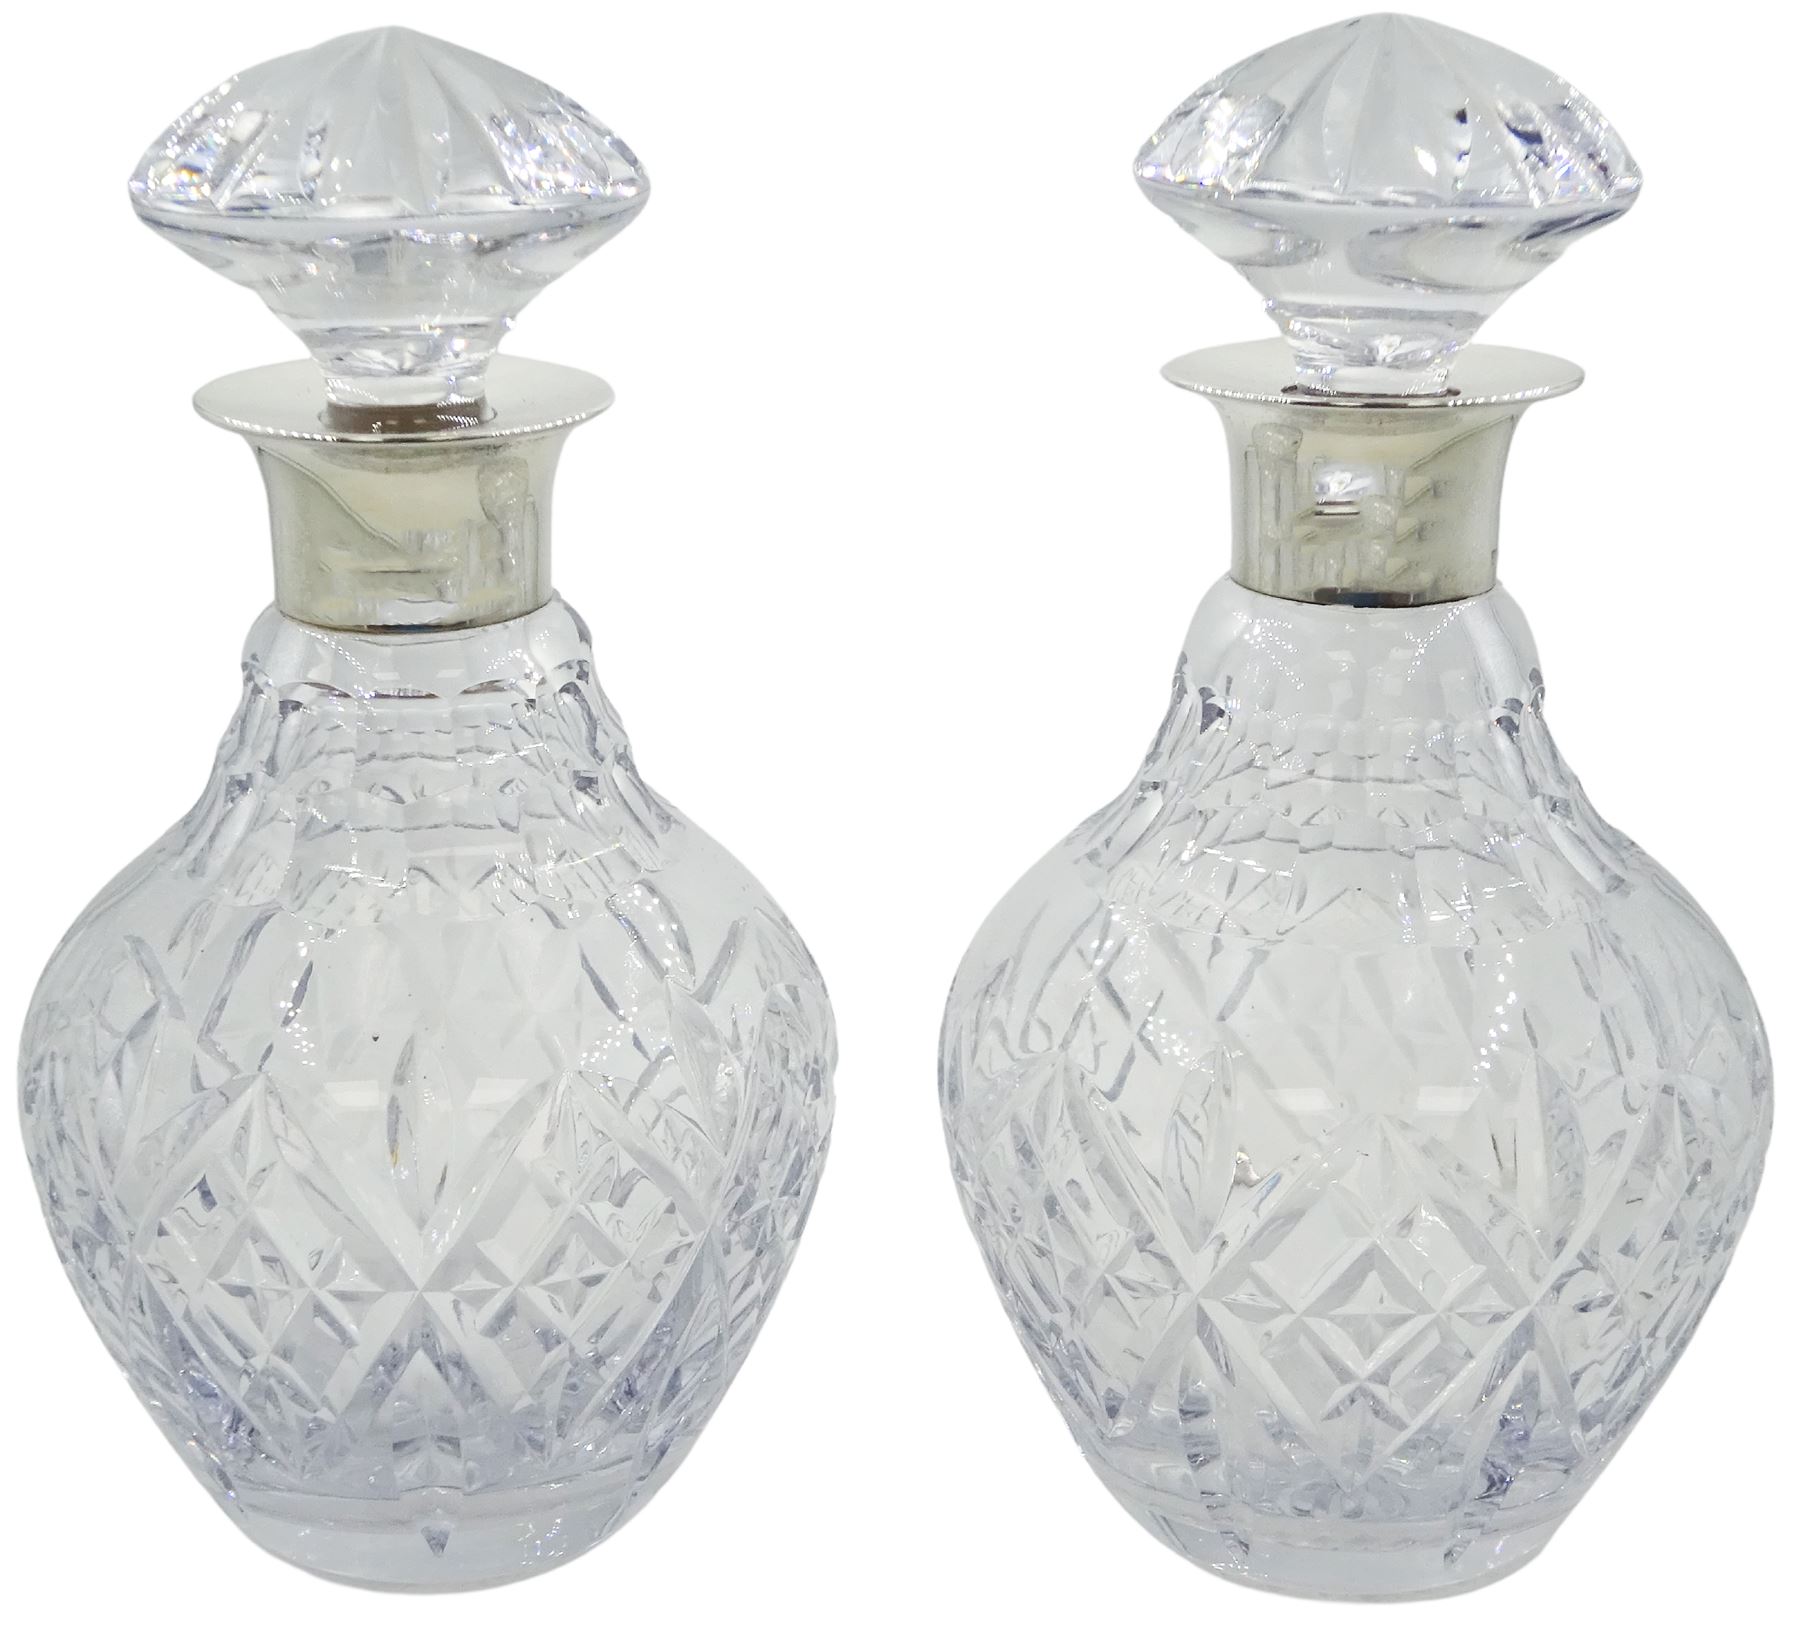 Pair of modern silver mounted Royal Doulton cut glass decanters